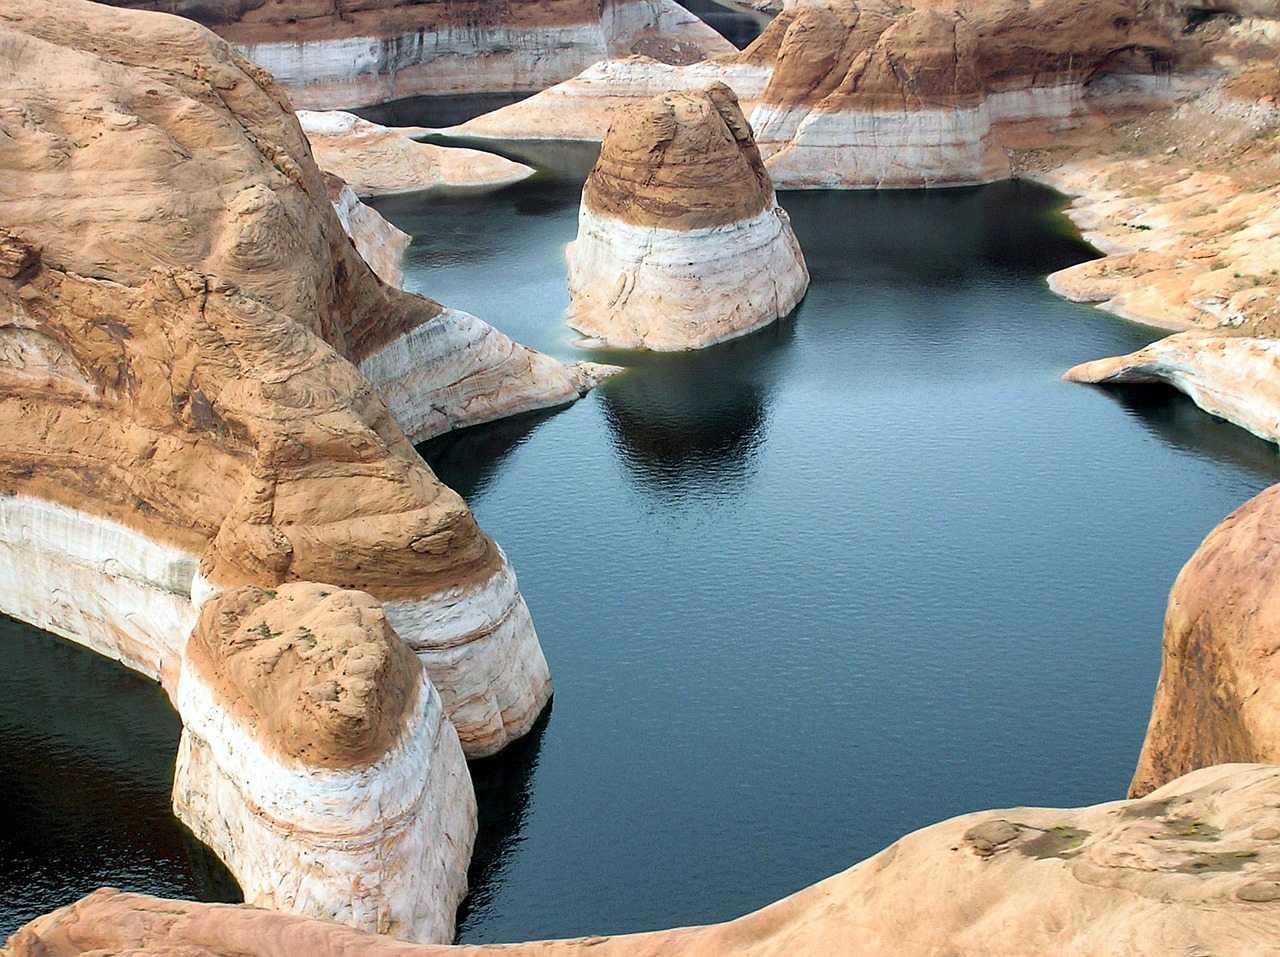 mountain formations at glen canyon